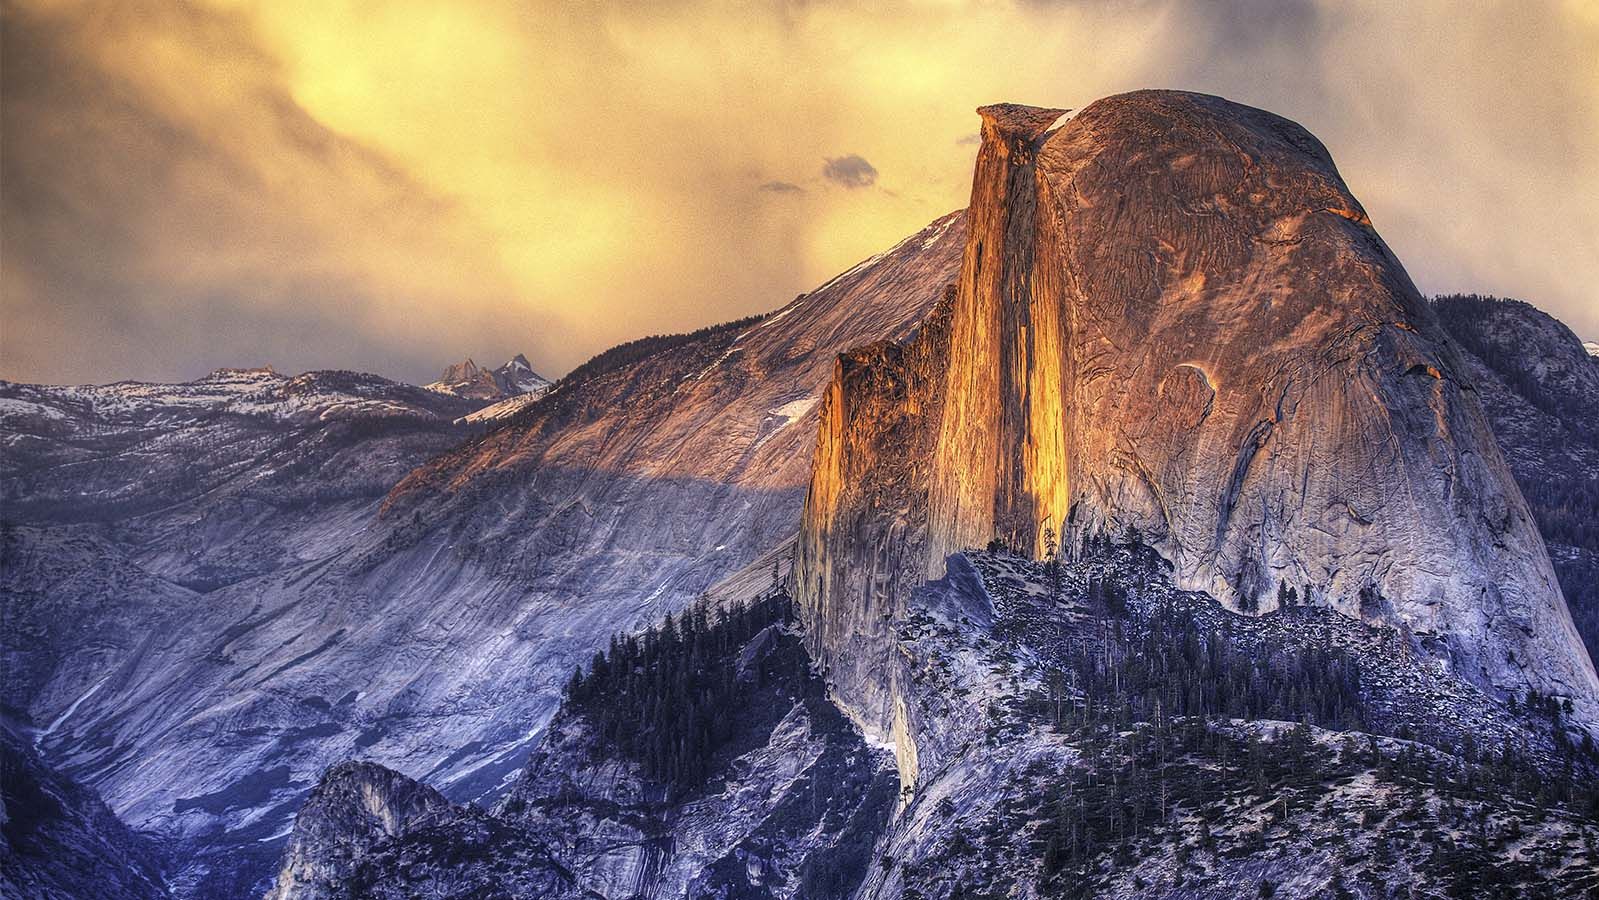 Yosemite National Park visitor dies after falling from the Half Dome ...